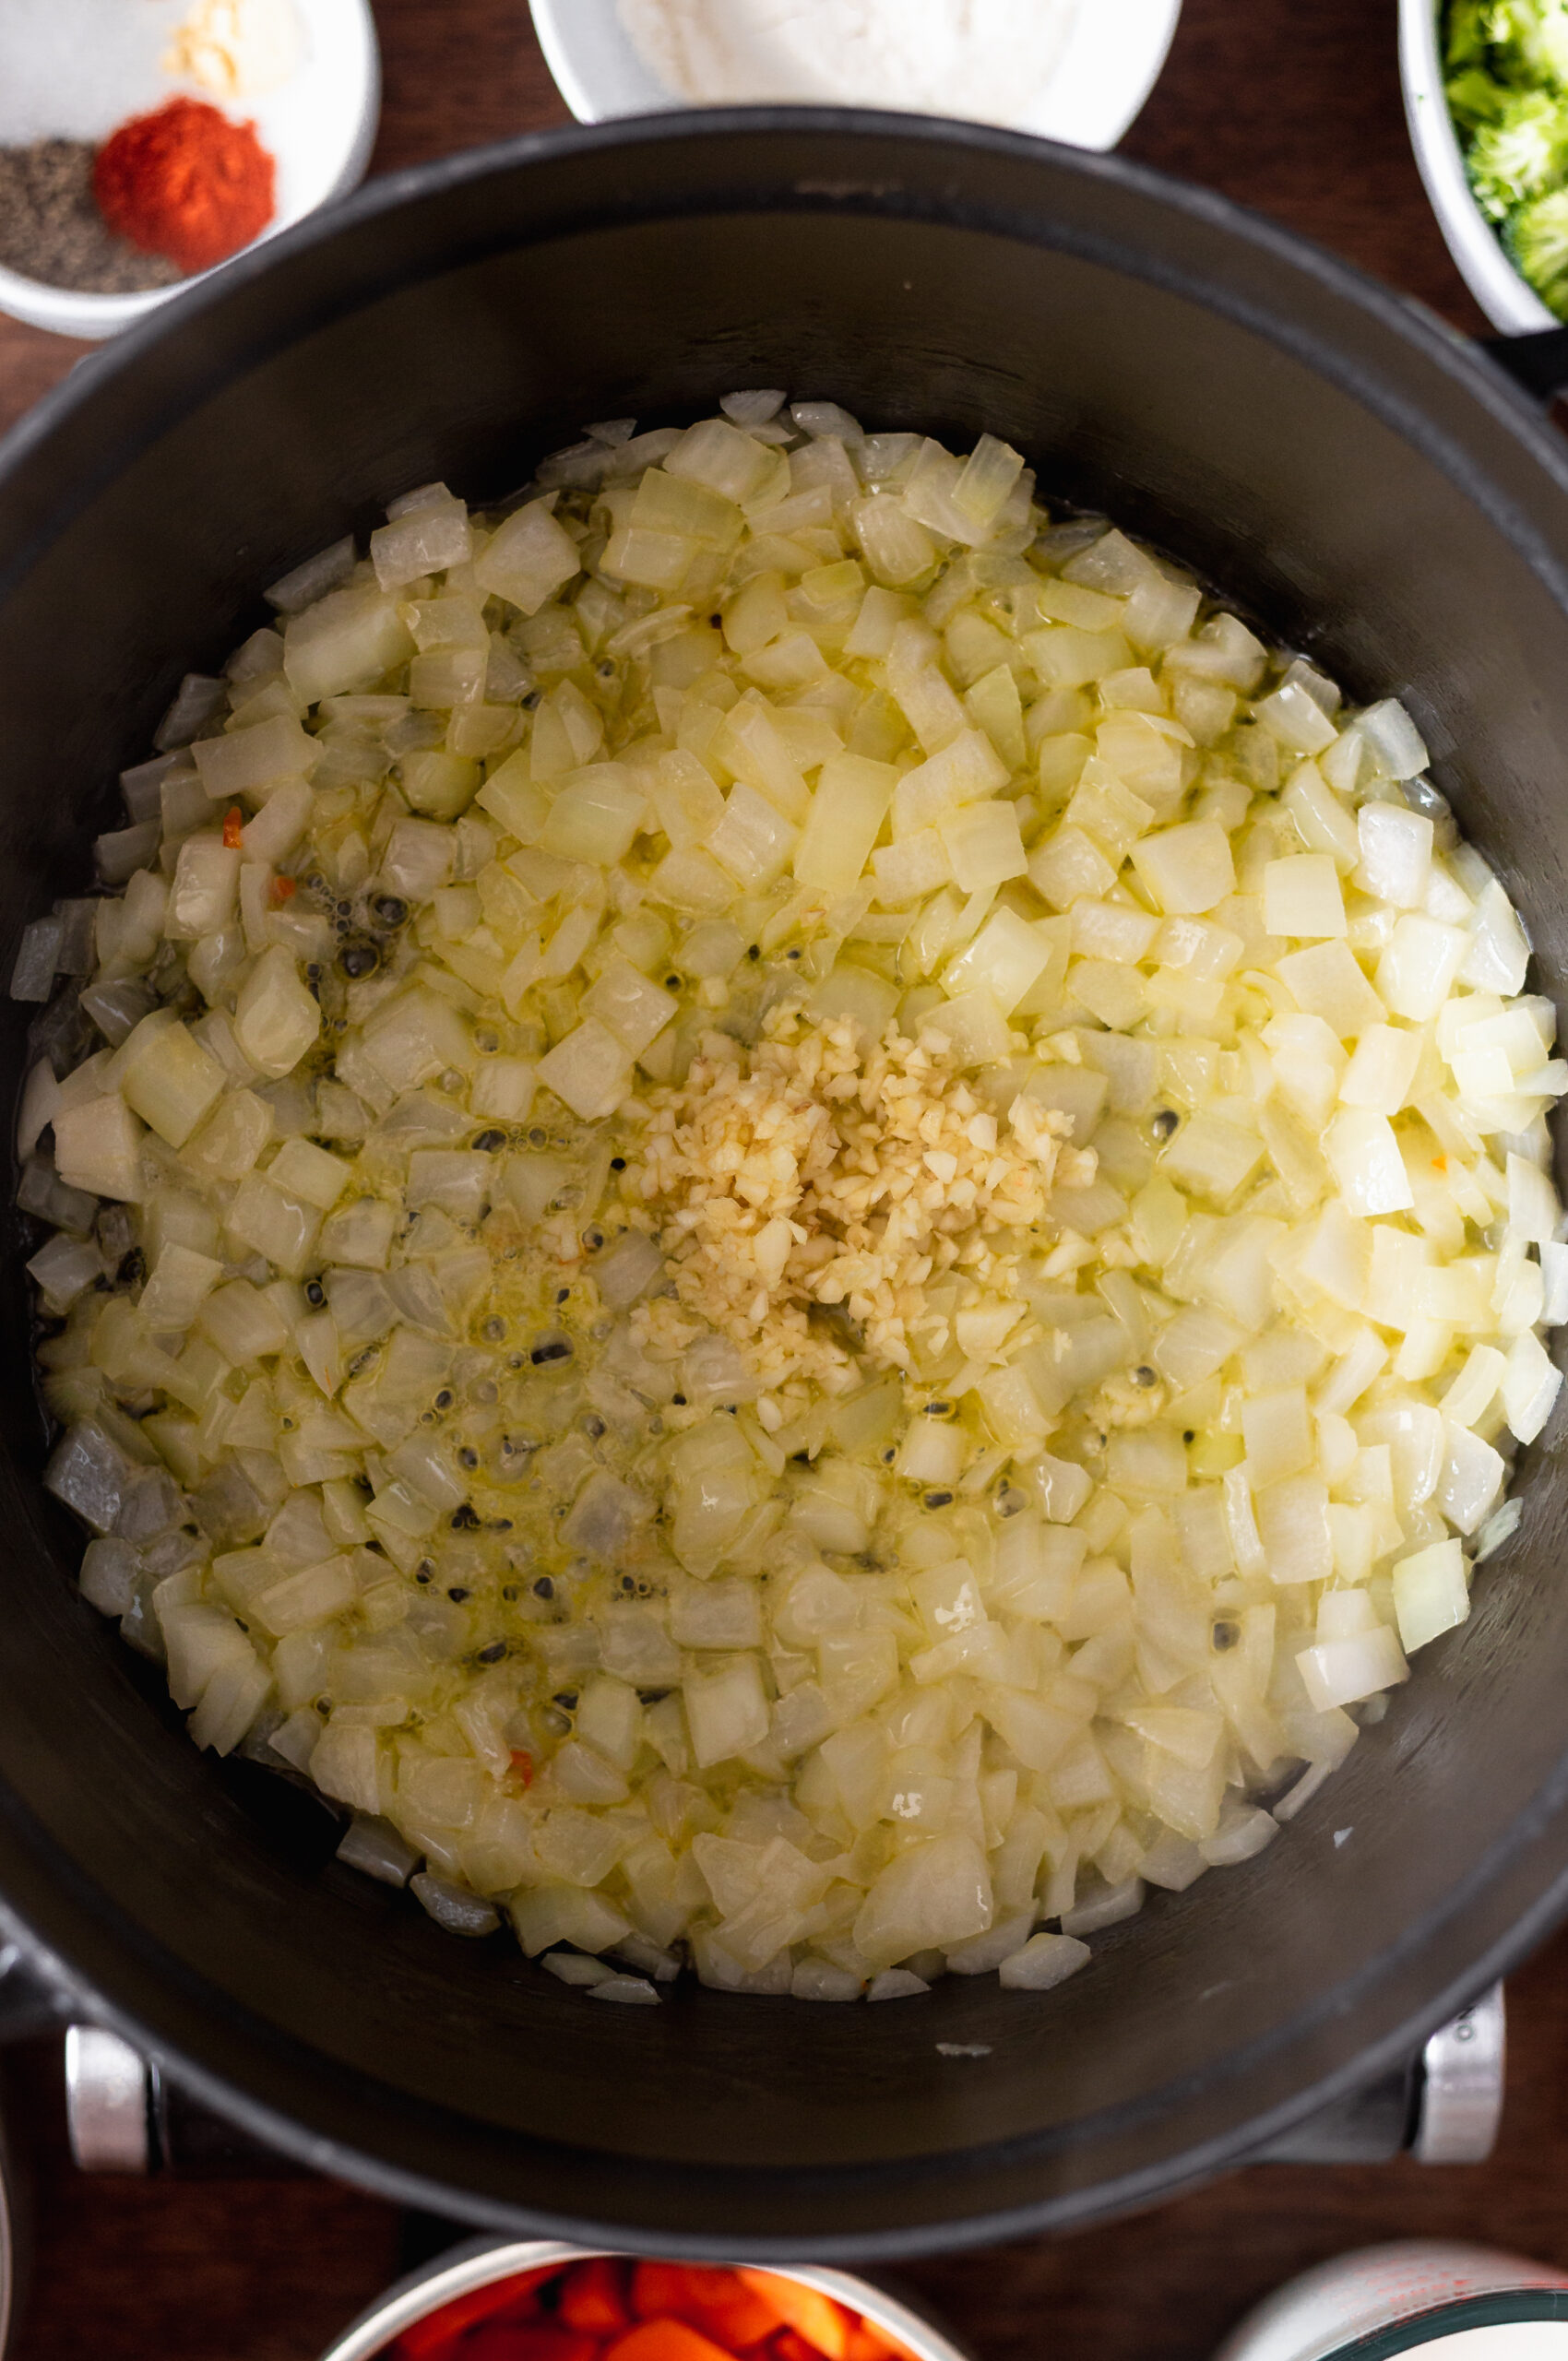 Garlic added to onion in a pot